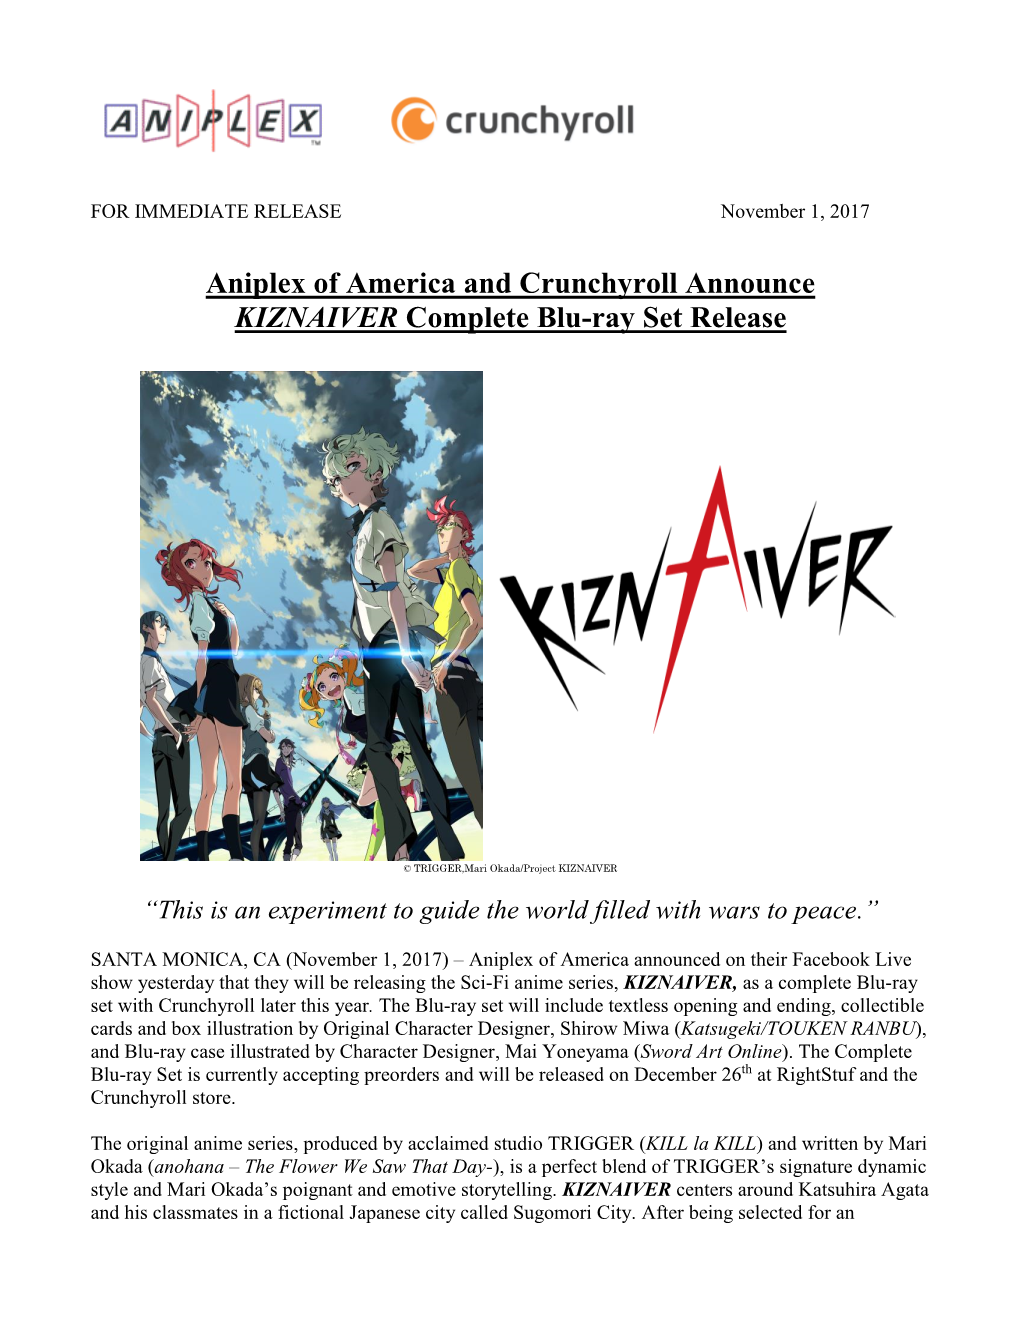 Aniplex of America and Crunchyroll Announce KIZNAIVER Complete Blu-Ray Set Release